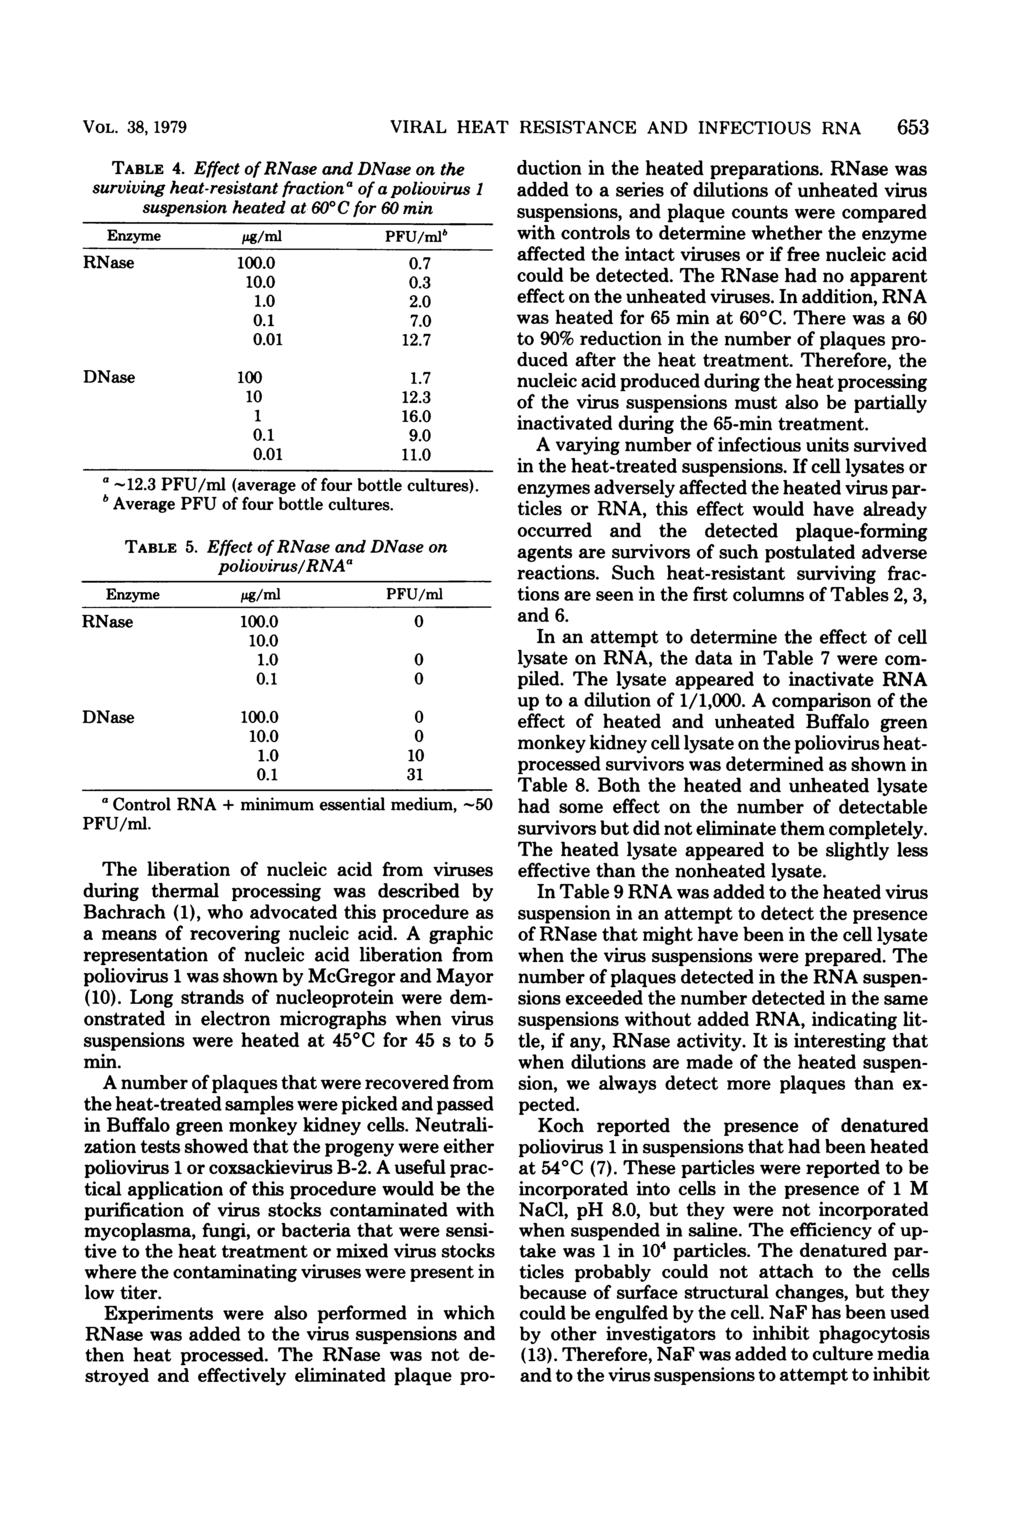 VOL. 38, 1979 TABLE 4. Effect of RNase and DNase on the surviving heat-resistant fractiona of a poliovirus 1 suspension heated at 60 C for 60 min Enzyme jg/rml PFU/mlb RNase 100.0 0.7 10.0 0.3 1.0 2.